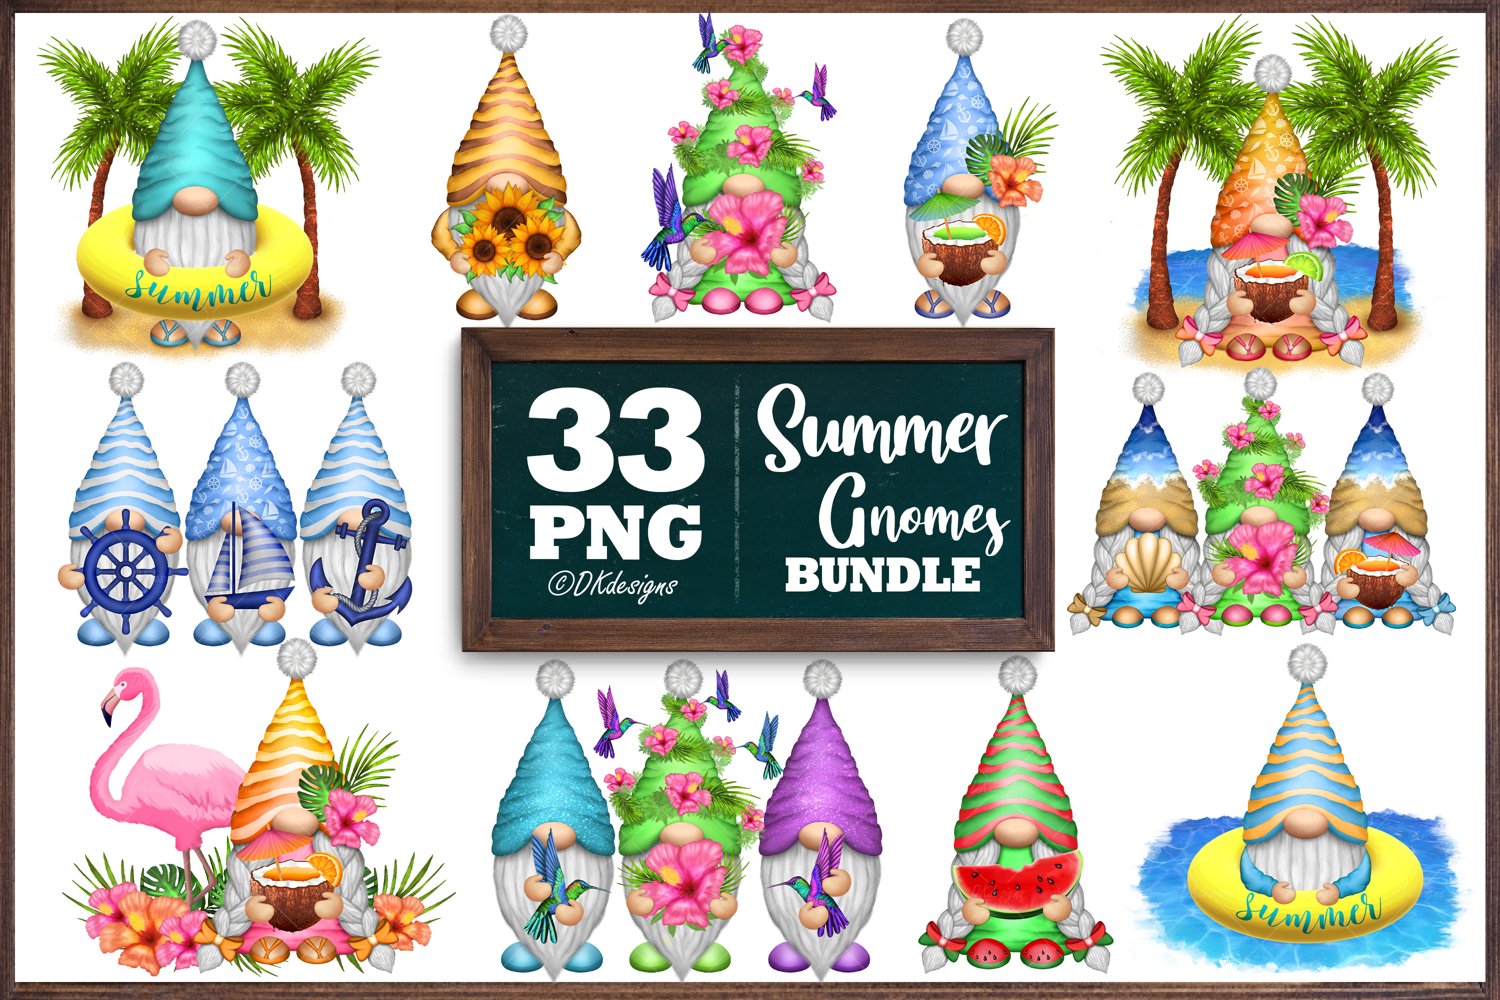 Cover image of Summer Gnomes Sublimation Bundle.